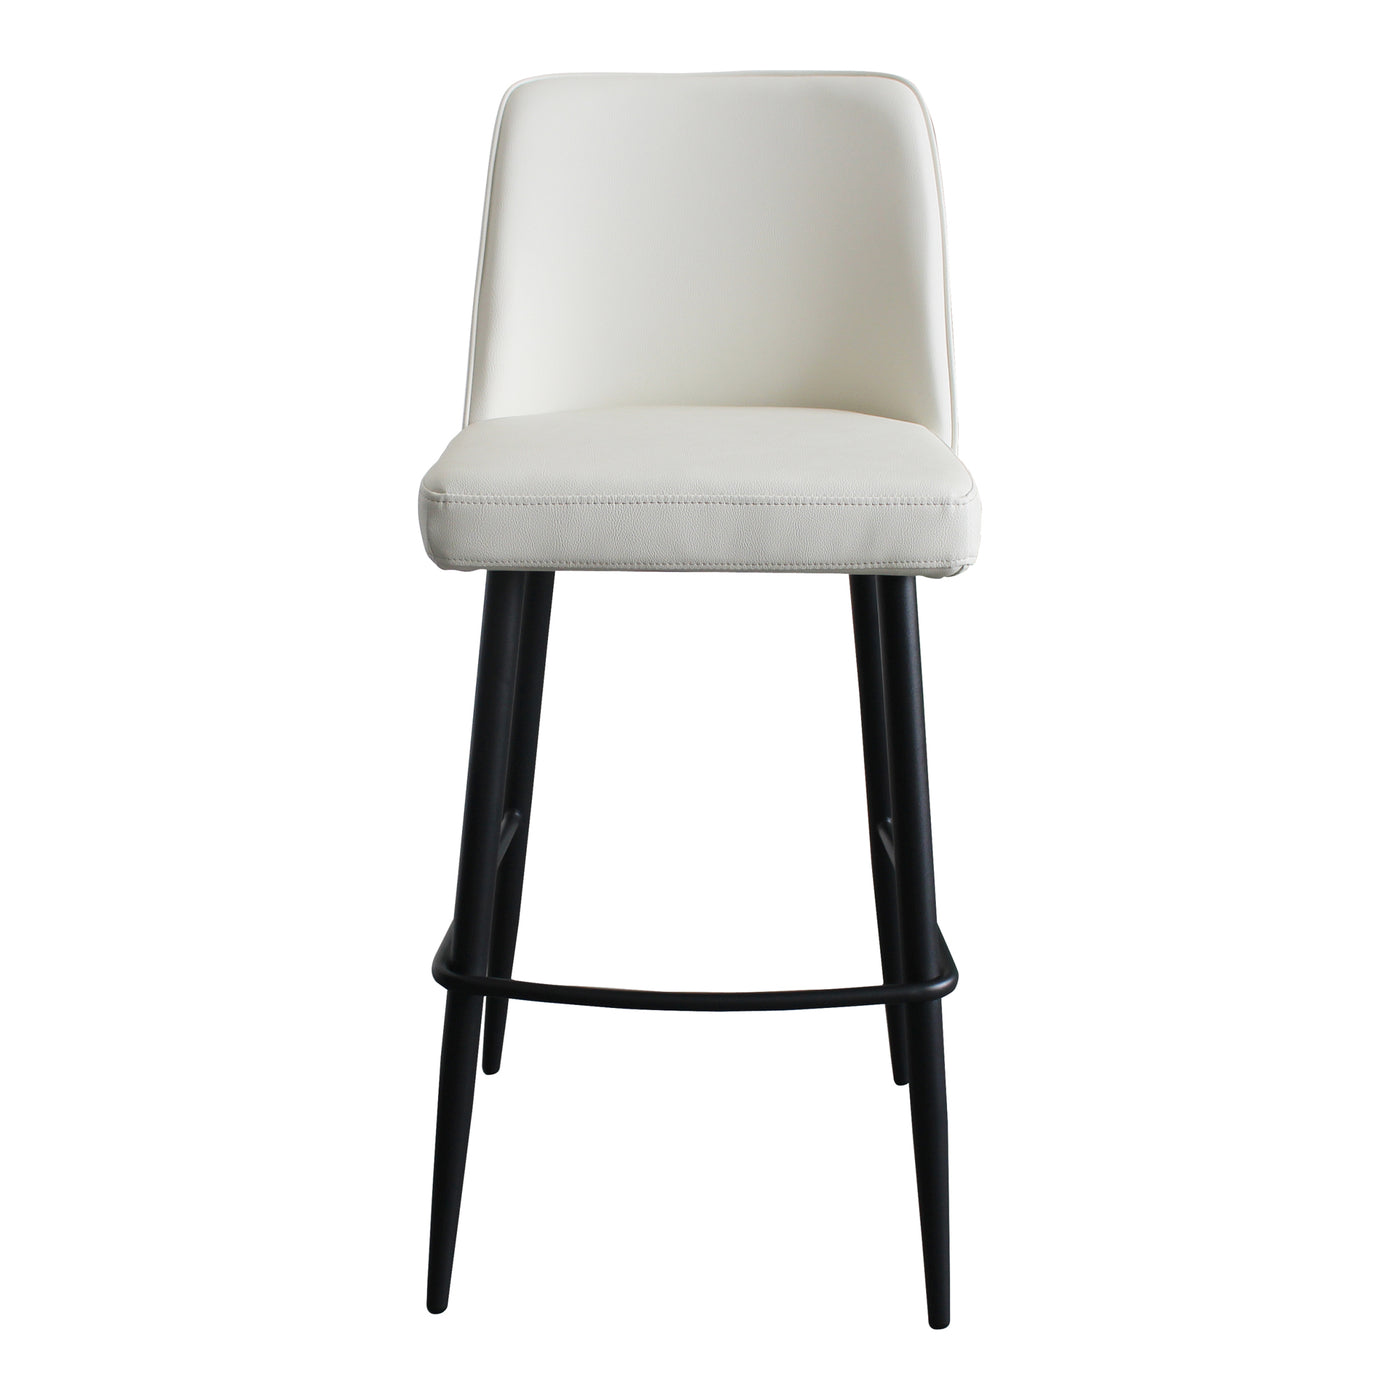 Sit back, relax and enjoy your next dinner date on the Emelia barstool. Elegant metal legs give it a sleek base, and a tra...